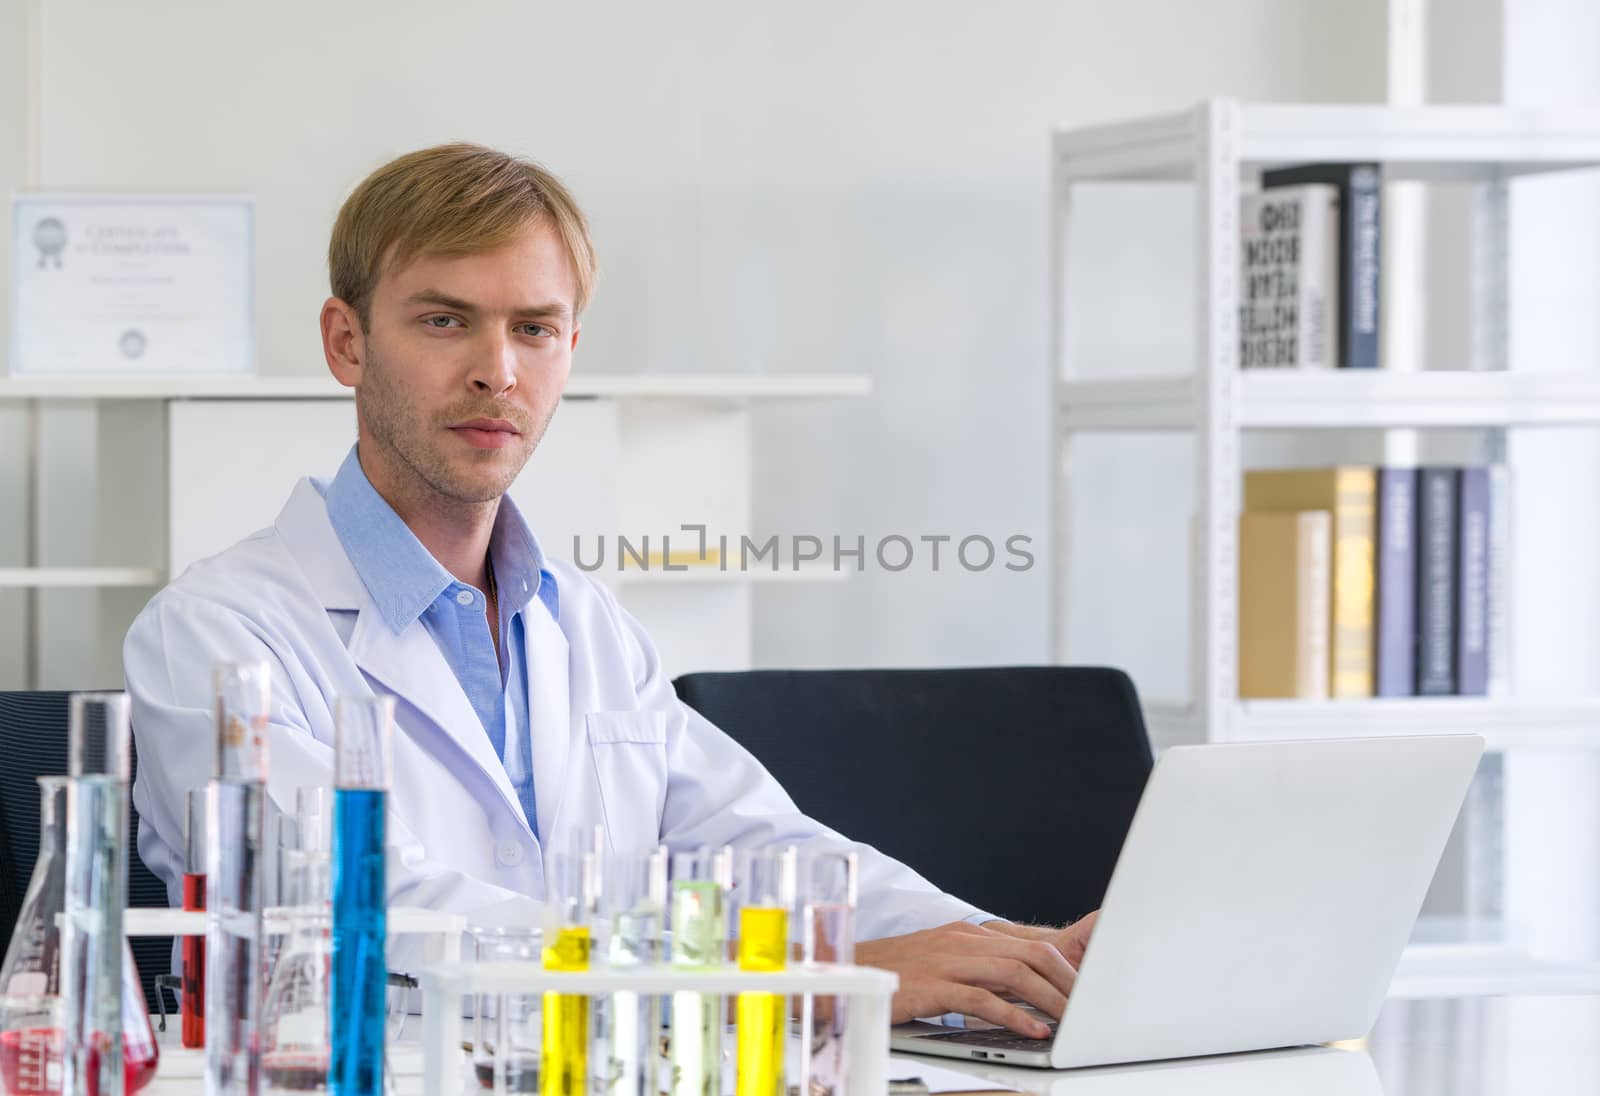 A young Brazilian scientist use computers to research chemical compounds on the internet. Working atmosphere in chemical laboratory. Test tubes filled with chemicals on the table.